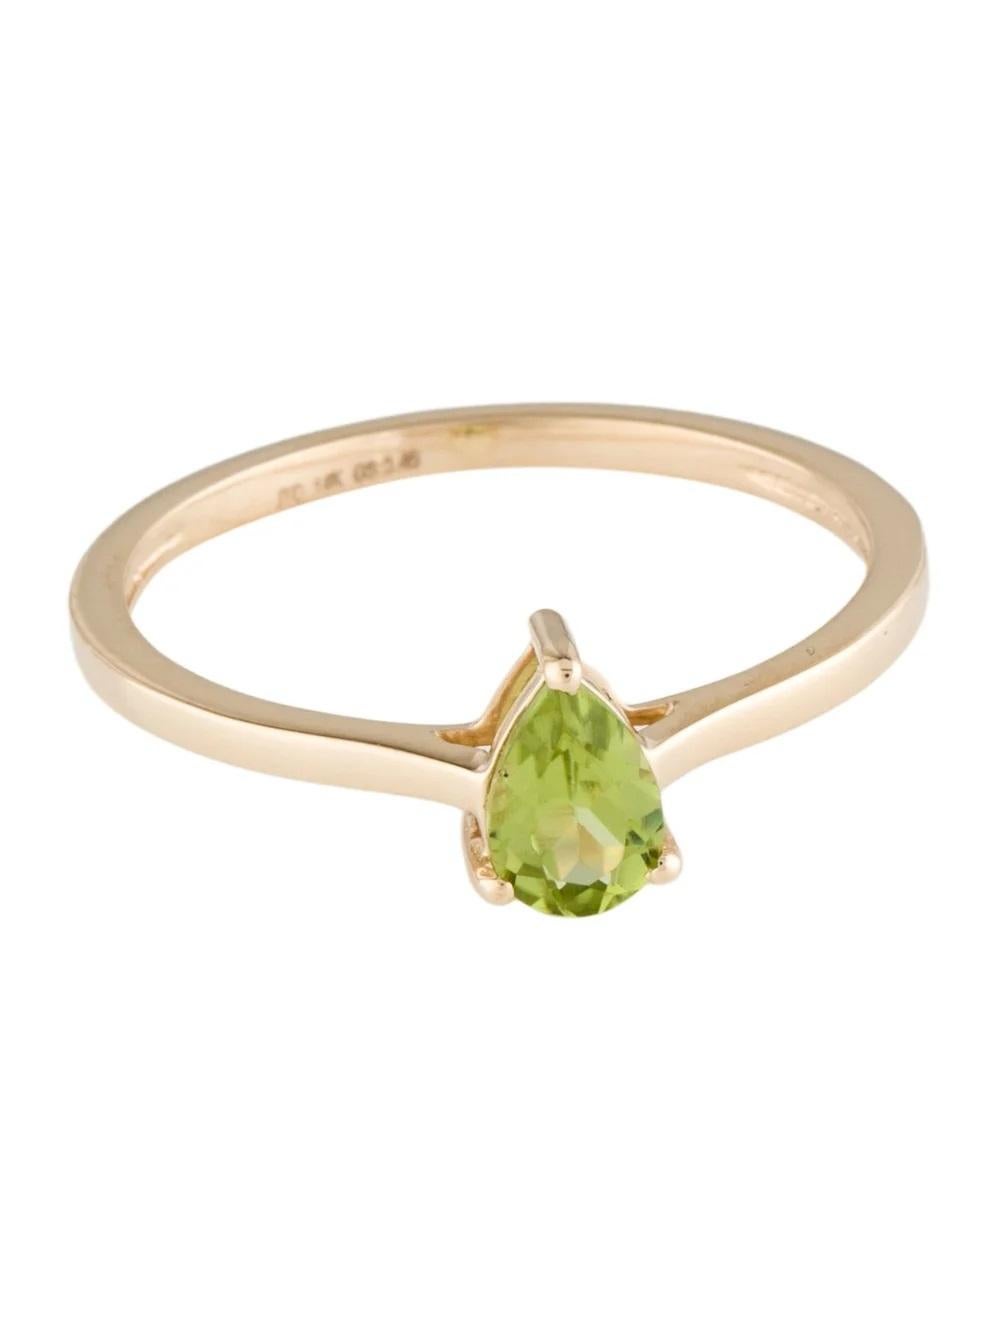 Pear Cut 14K Peridot Cocktail Ring, Size 6.75 - Green Gemstone Statement Piece, Elegant For Sale